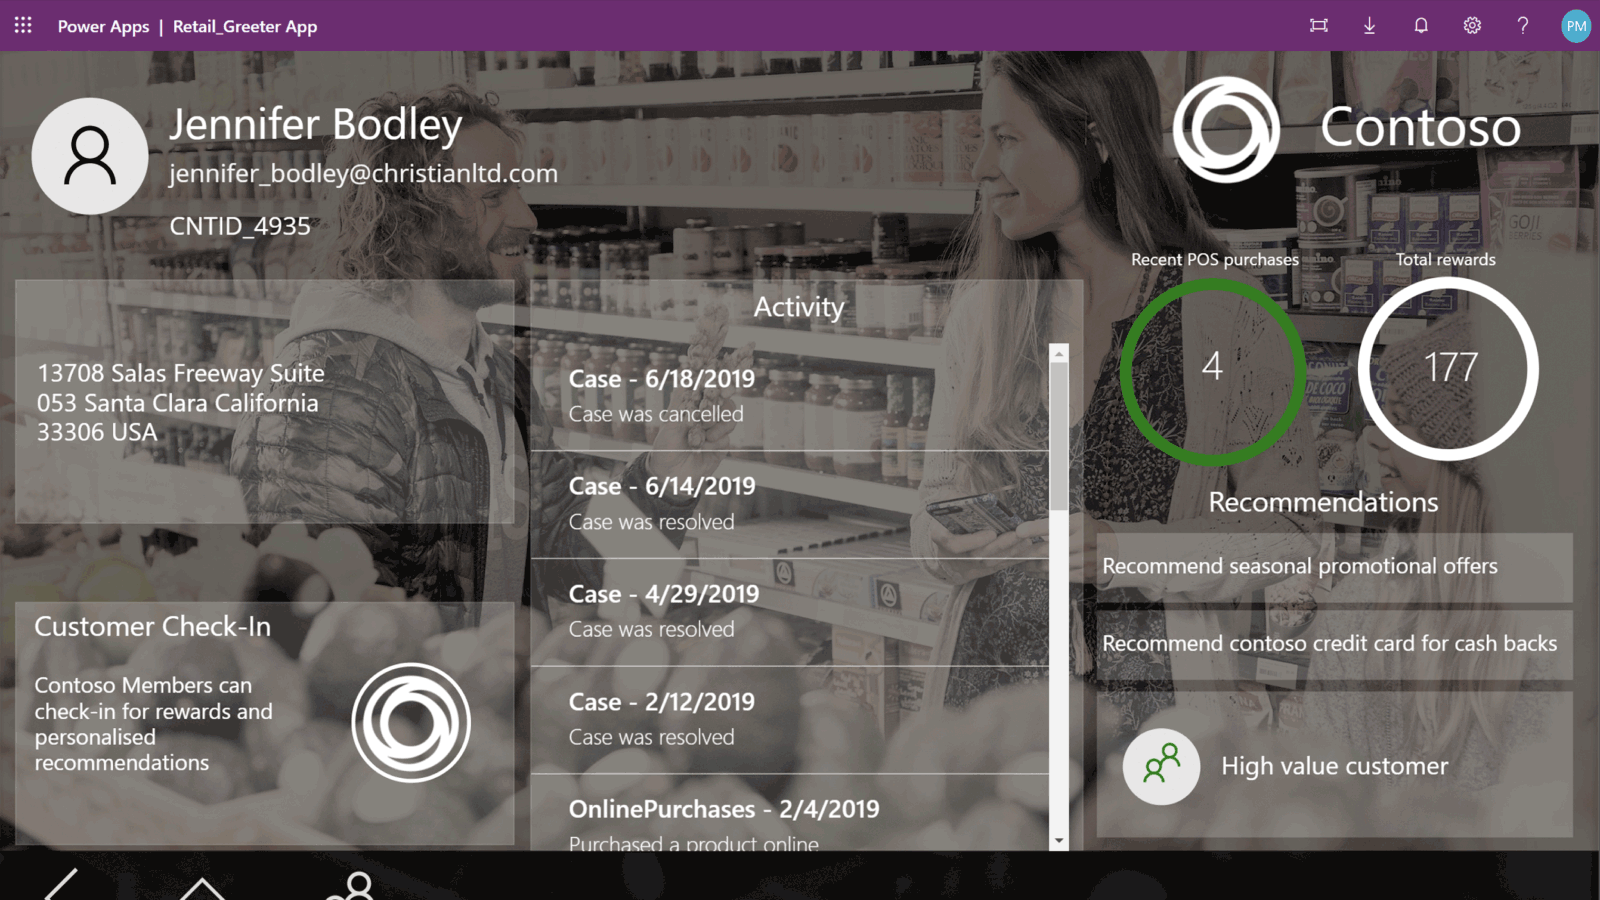 Image showing power apps retail greeter app view